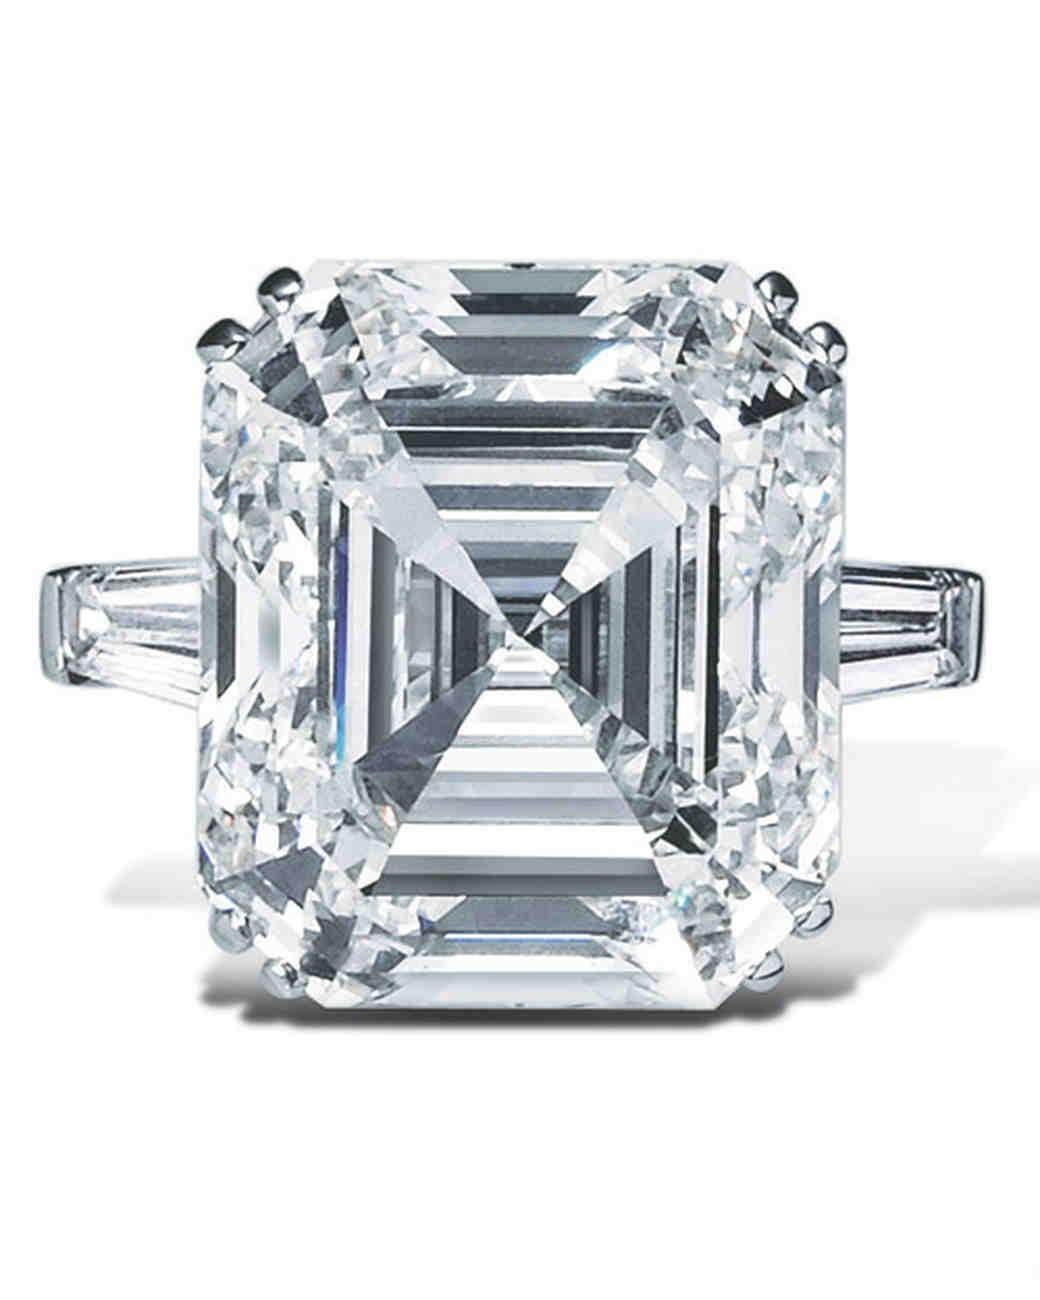 2 Carat Asscher Cut GIA Diamond Engagement 950 Platinum Ring In New Condition For Sale In Tarzana, CA